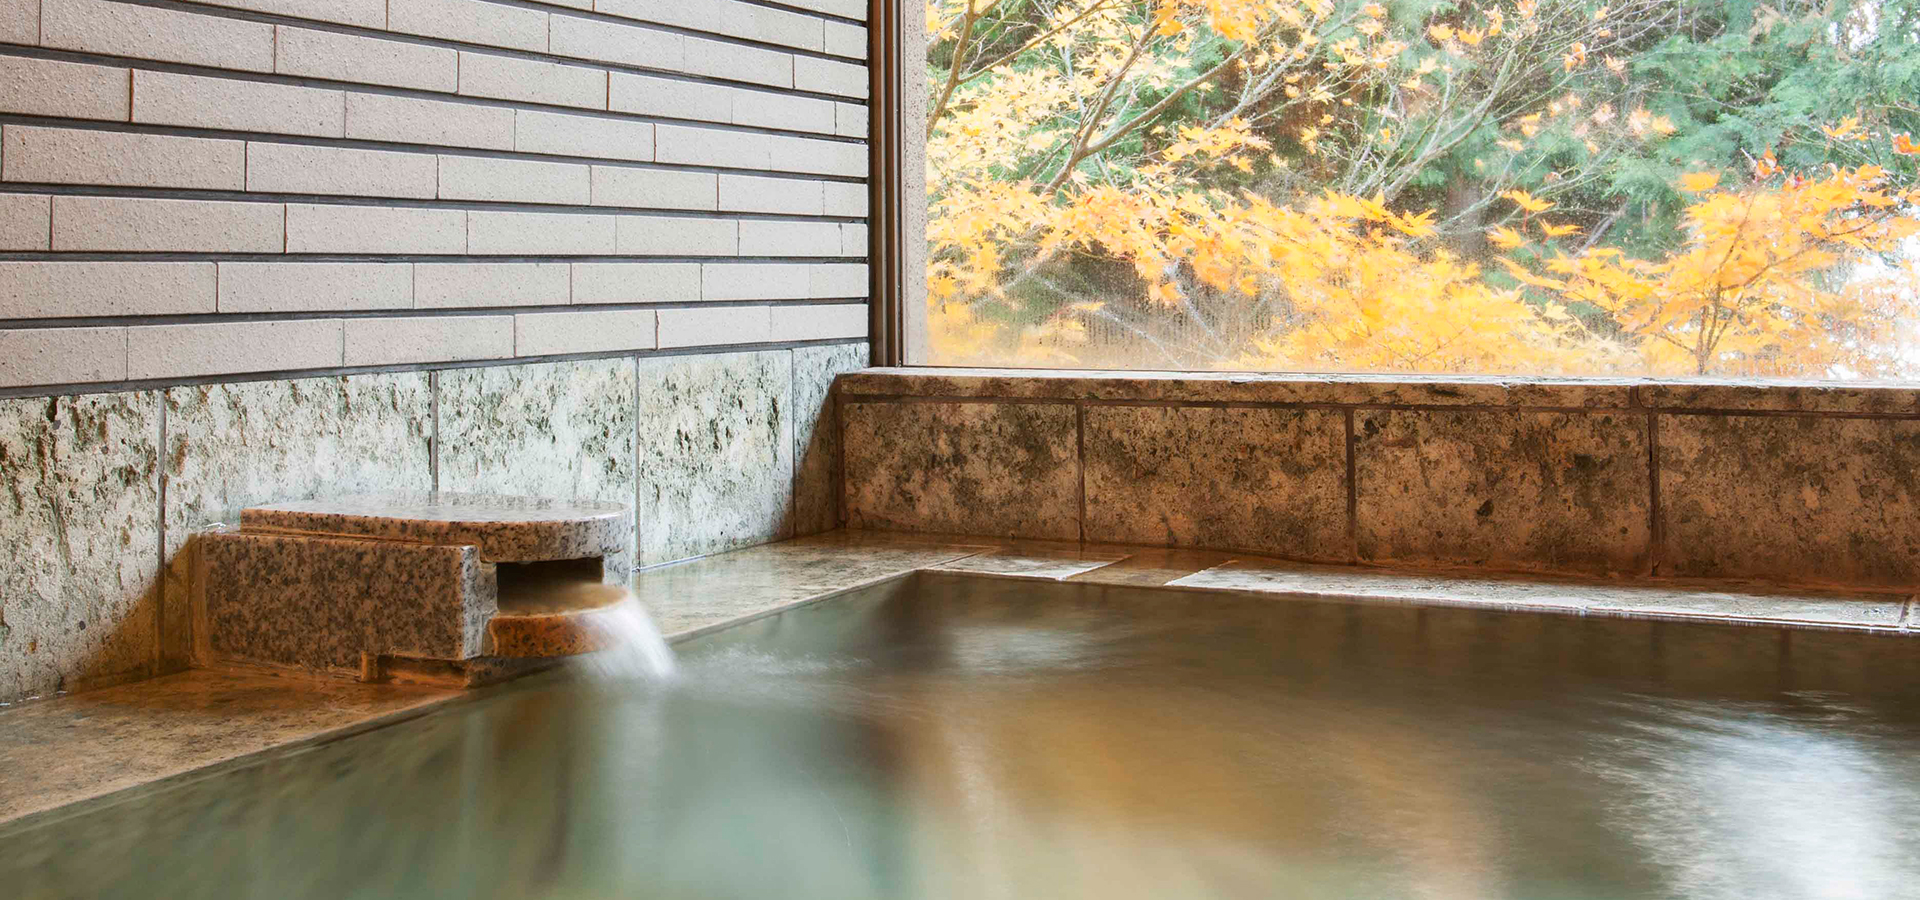 Special room with an private hot spring bath